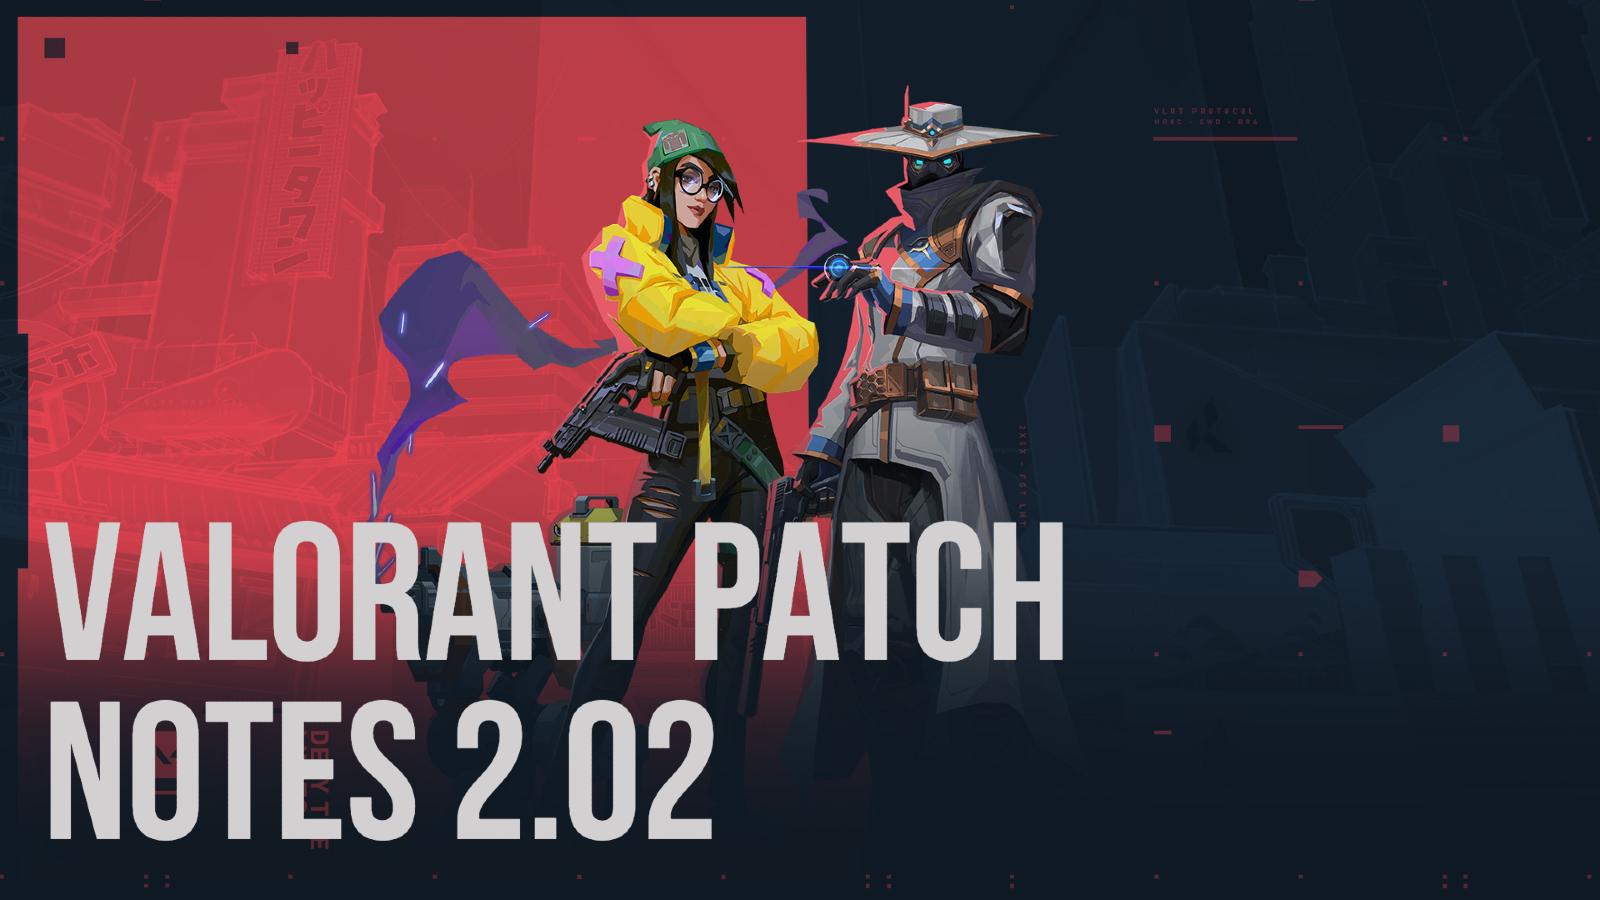 Valorant Patch Notes 2.02